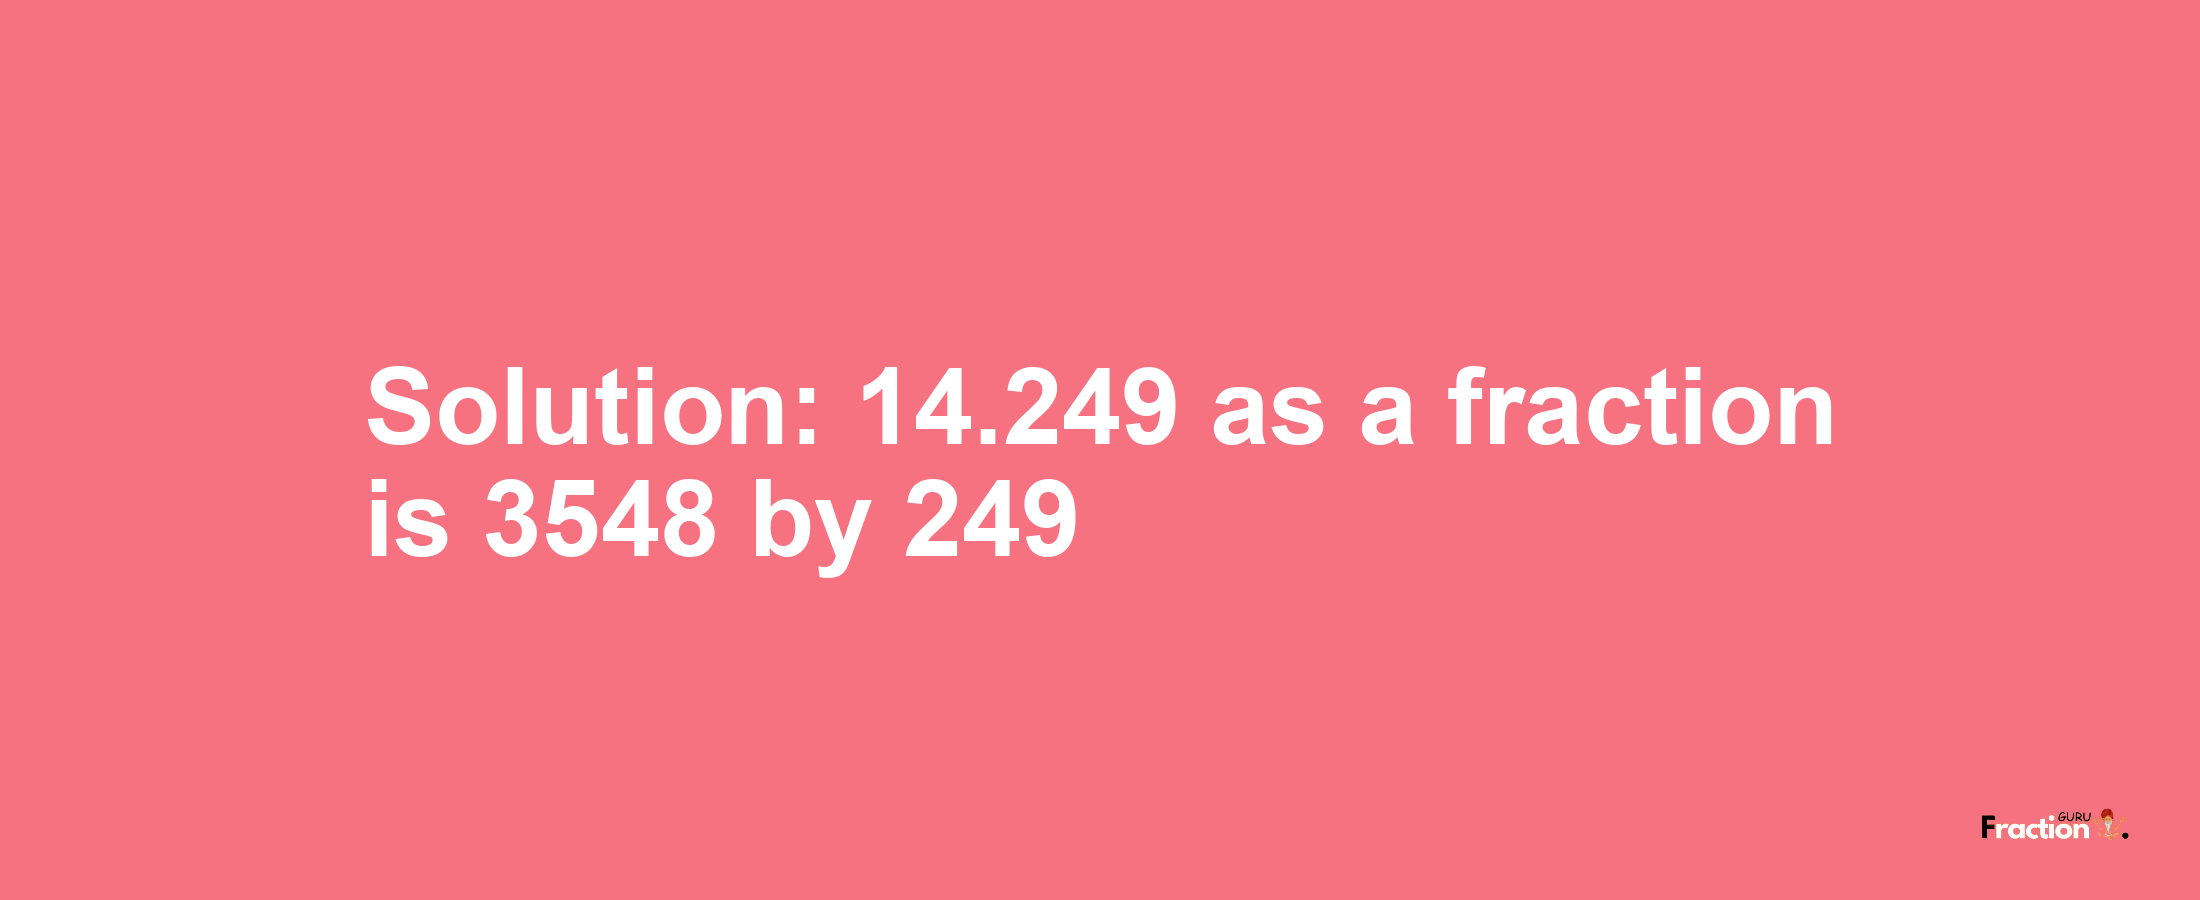 Solution:14.249 as a fraction is 3548/249